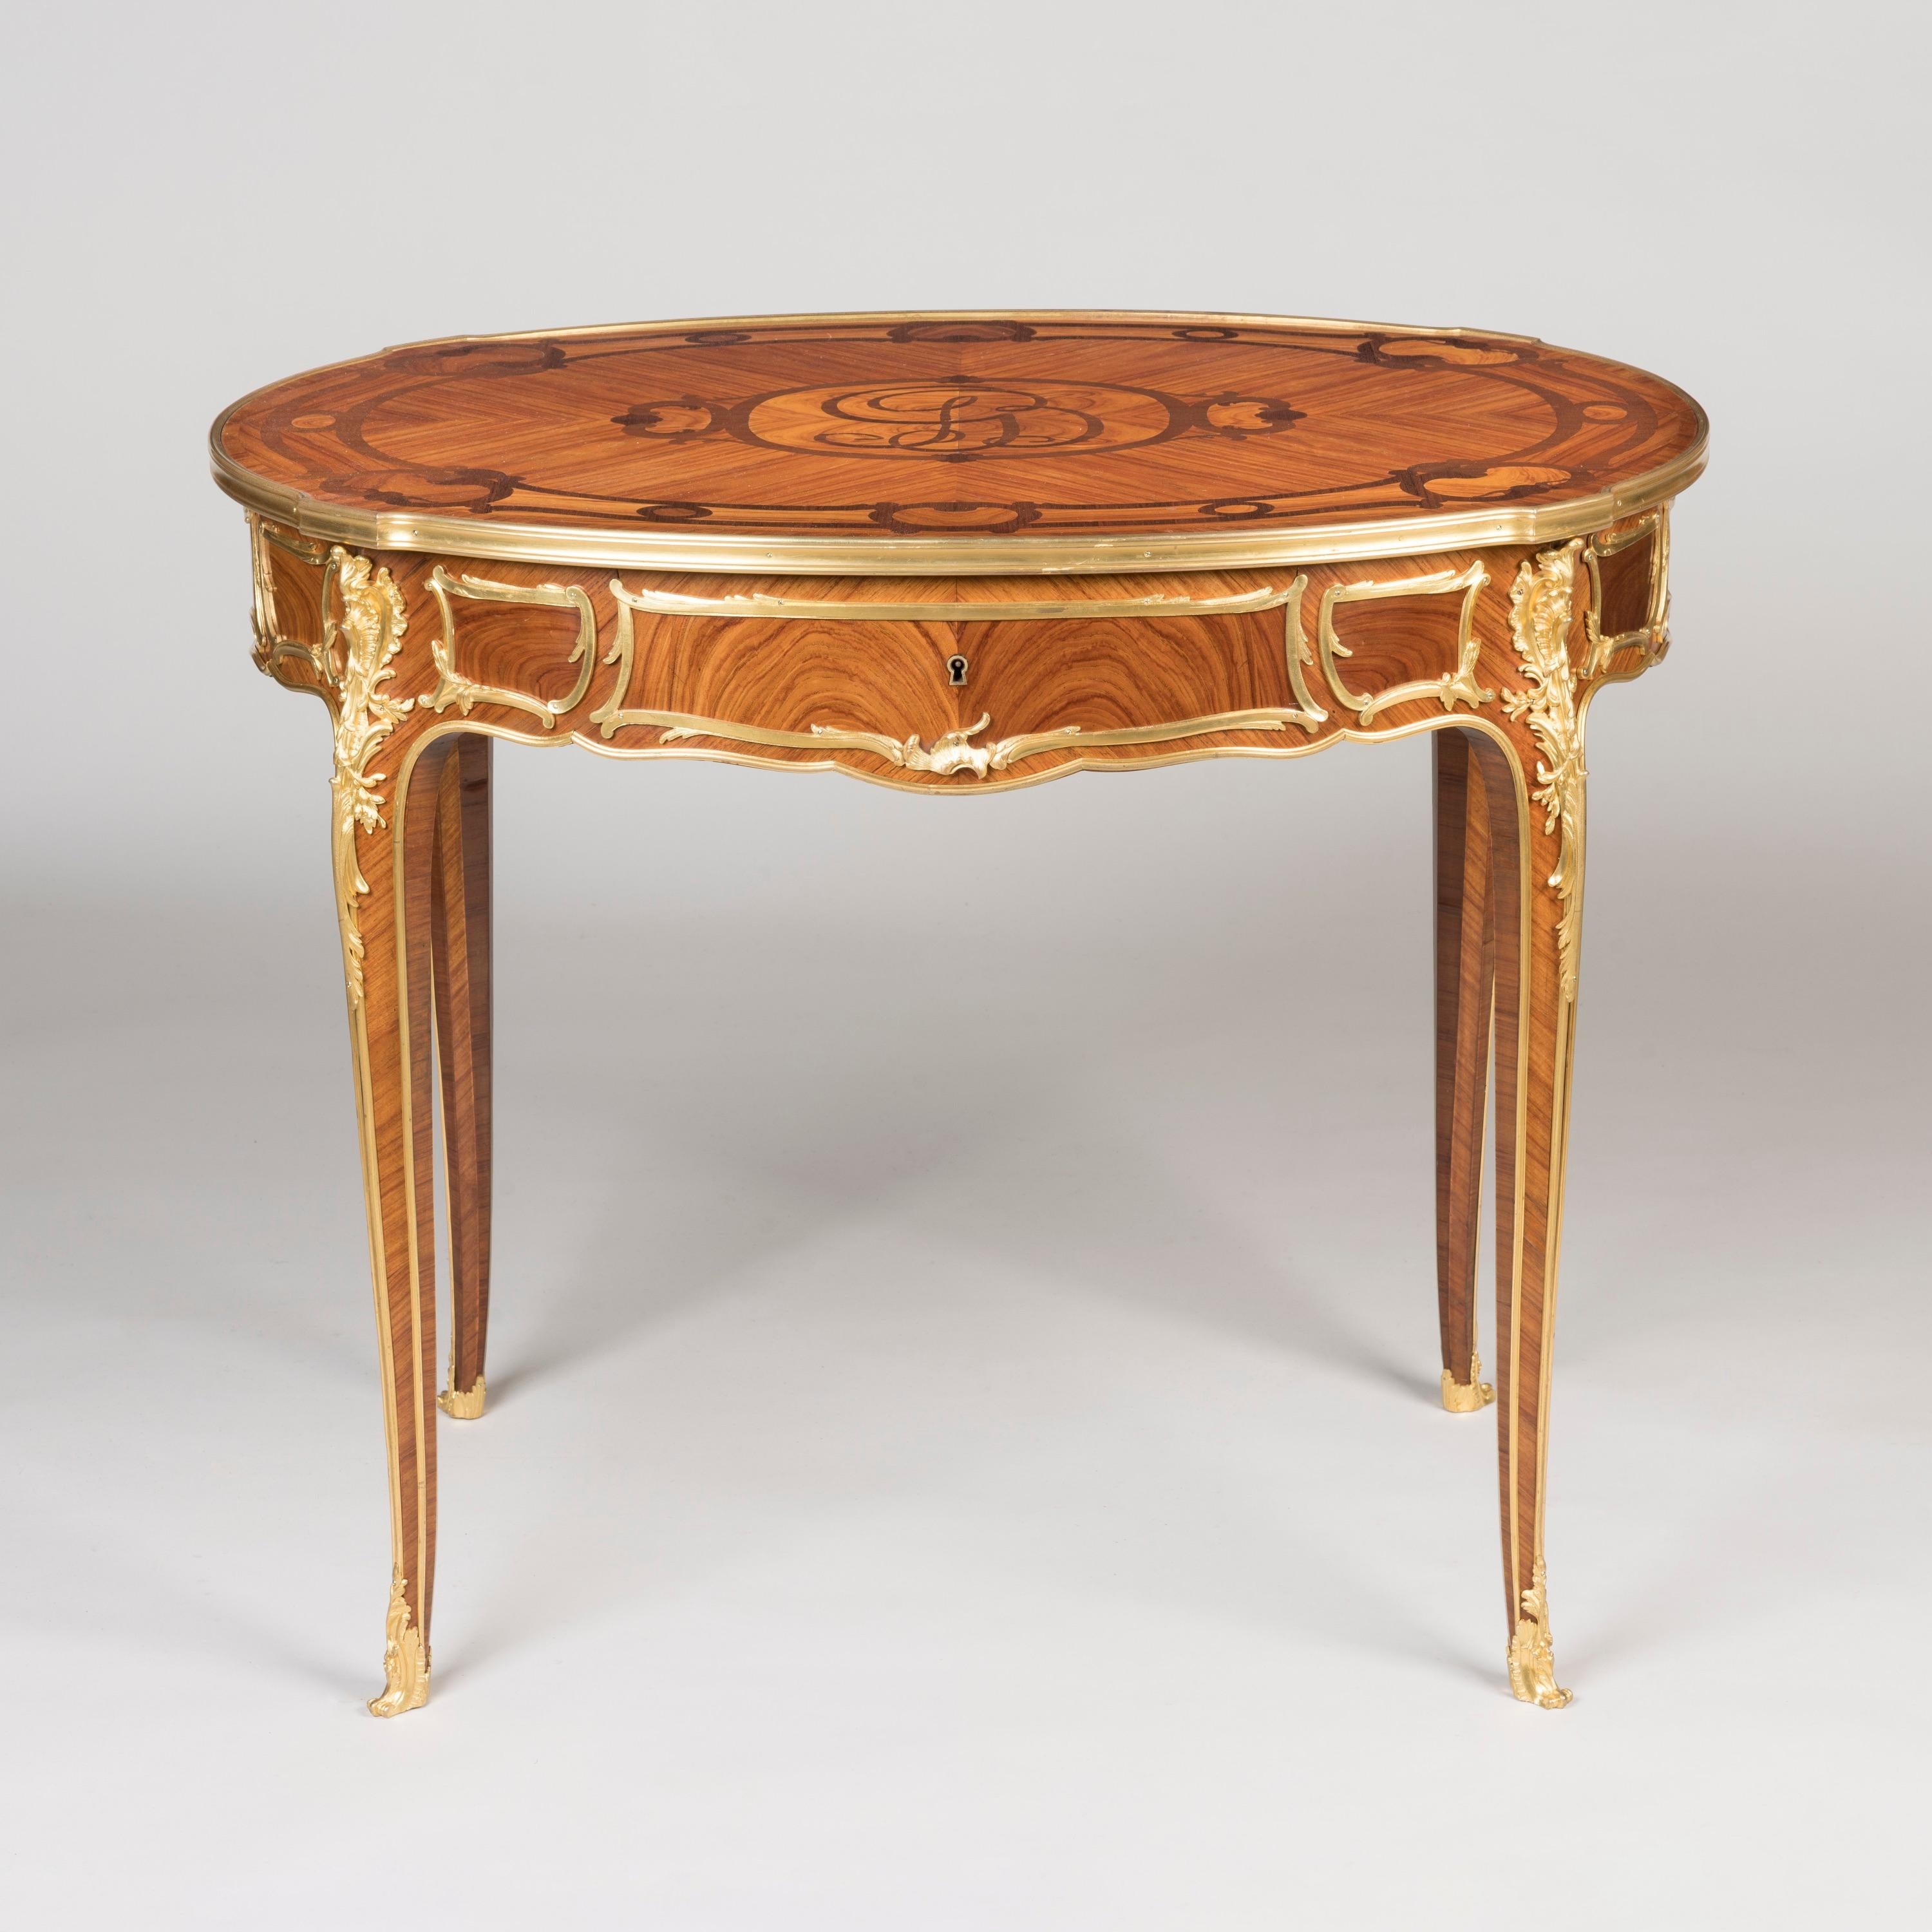 19th Century French Tulipwood Table in the Louis XVI Style For Sale 2